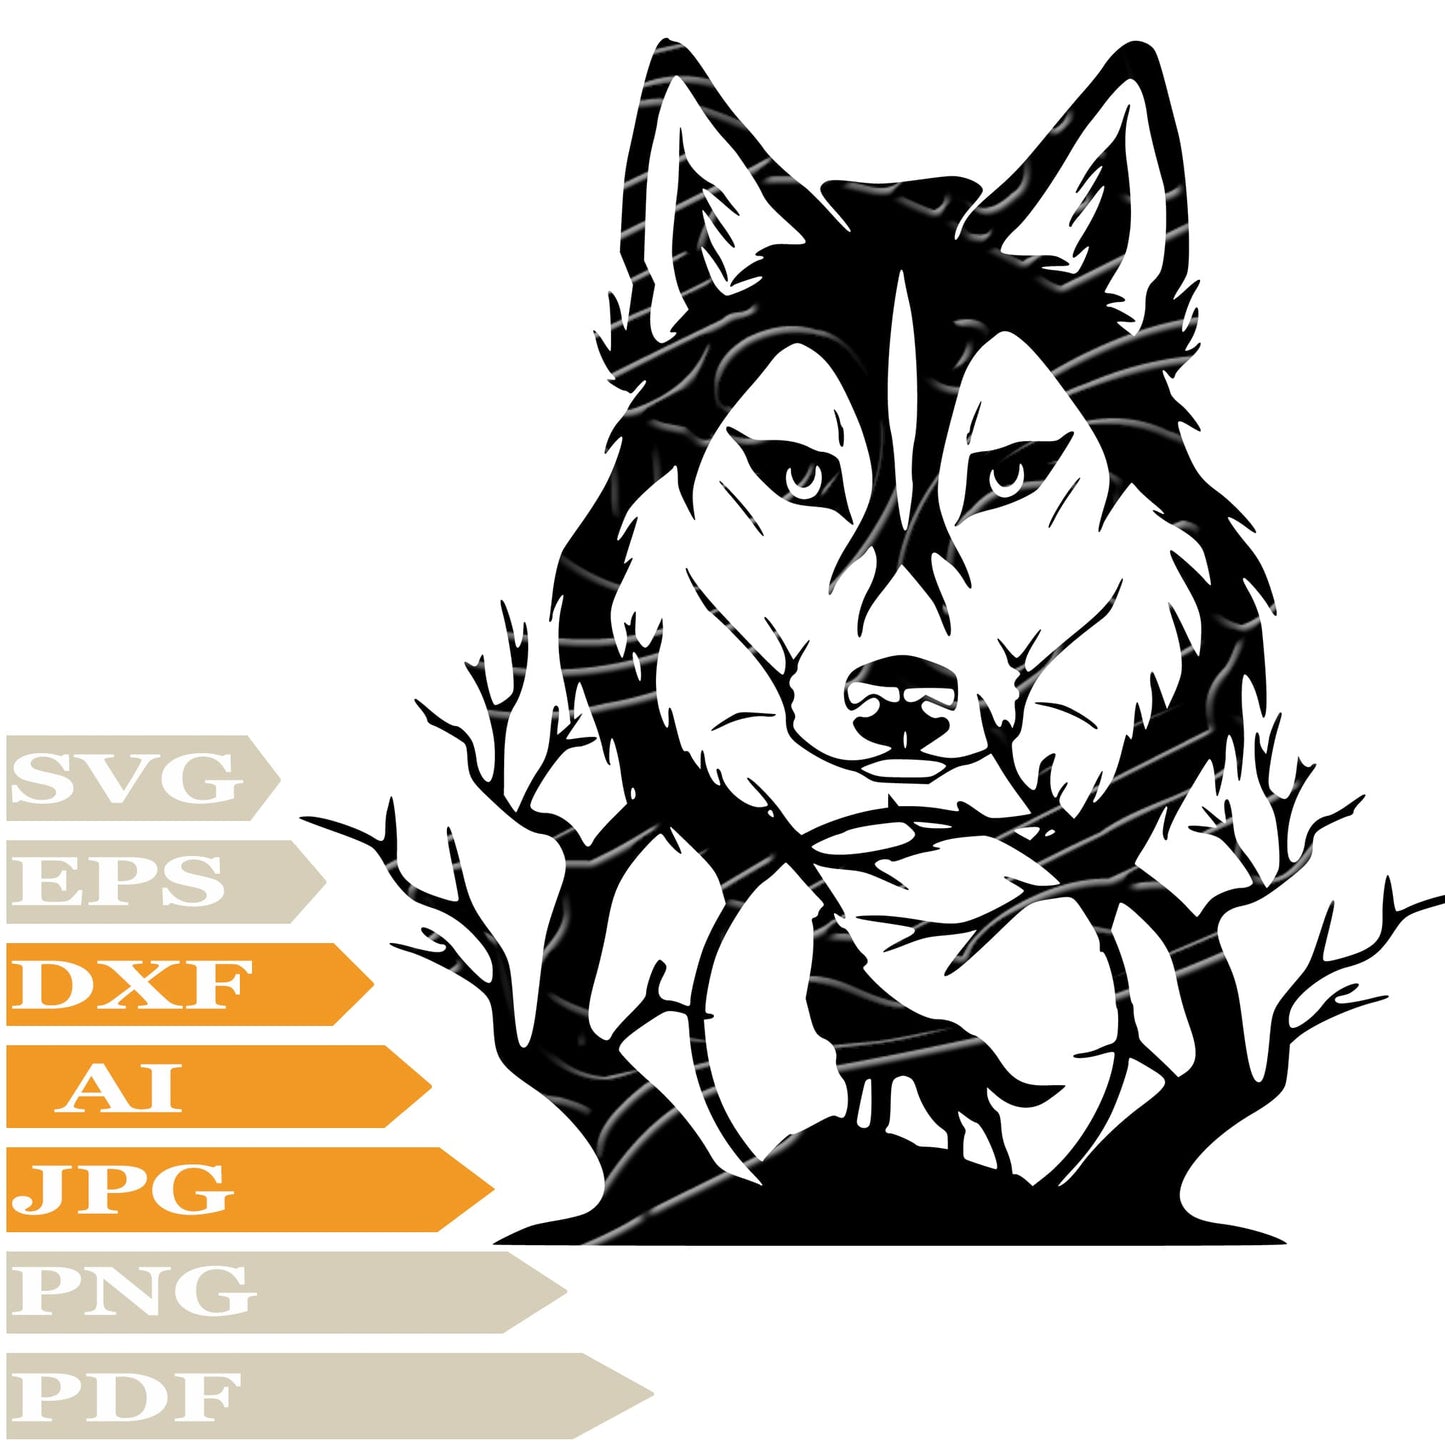 Wolf, Wolves Svg File, Image Cut, Png, For Tattoo, Silhouette, Digital Vector Download, Cut File, Clipart, For Cricut